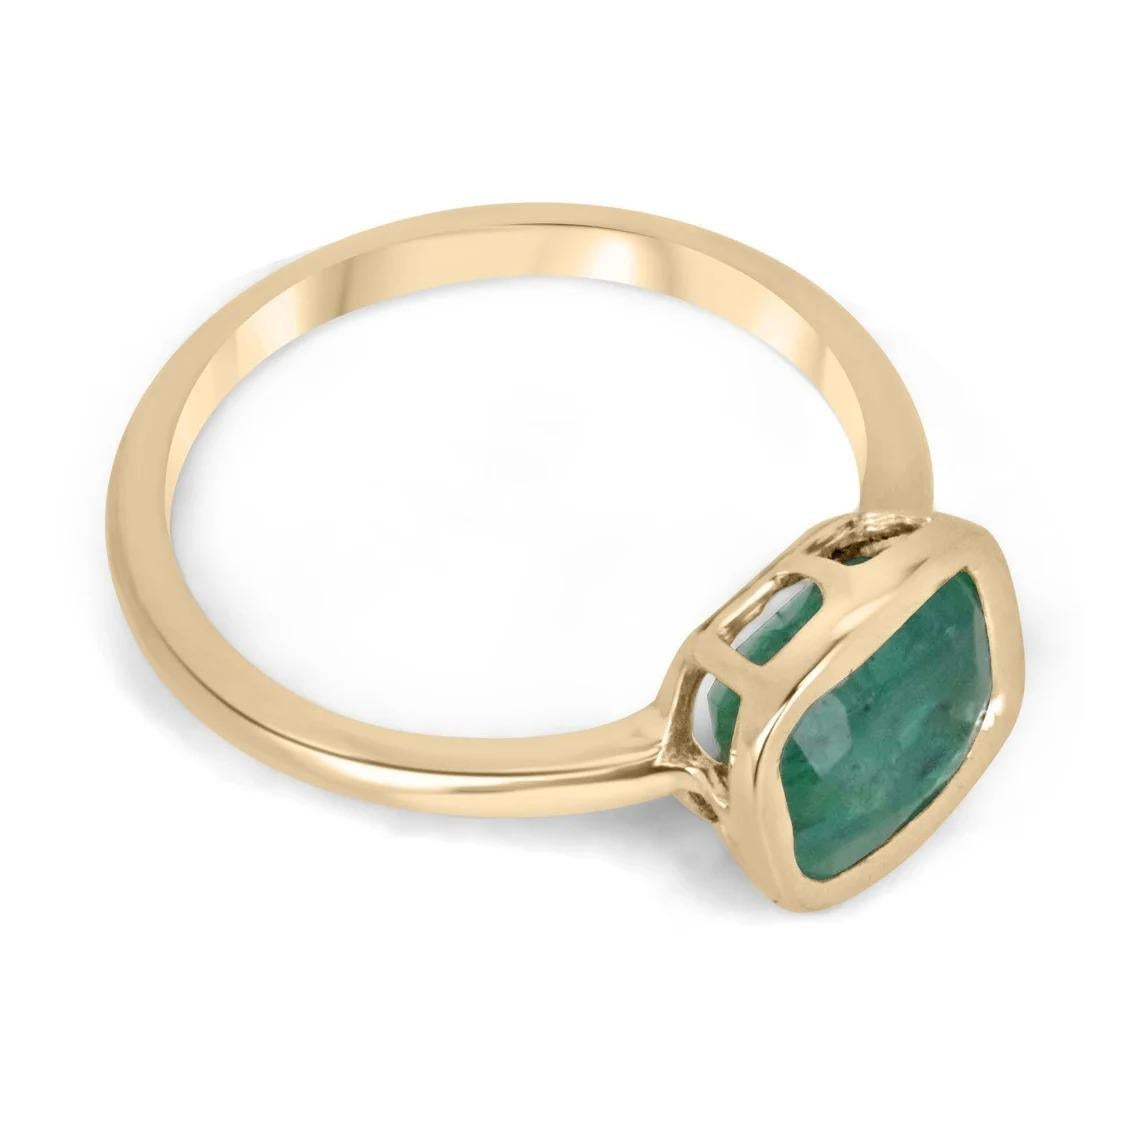 Introducing a captivating solitaire ladies' ring featuring a striking 1.68-carat cushion cut emerald of dark green color, offering a remarkable play of dim light and good clarity despite some superficial scratches on its surface. The emerald is